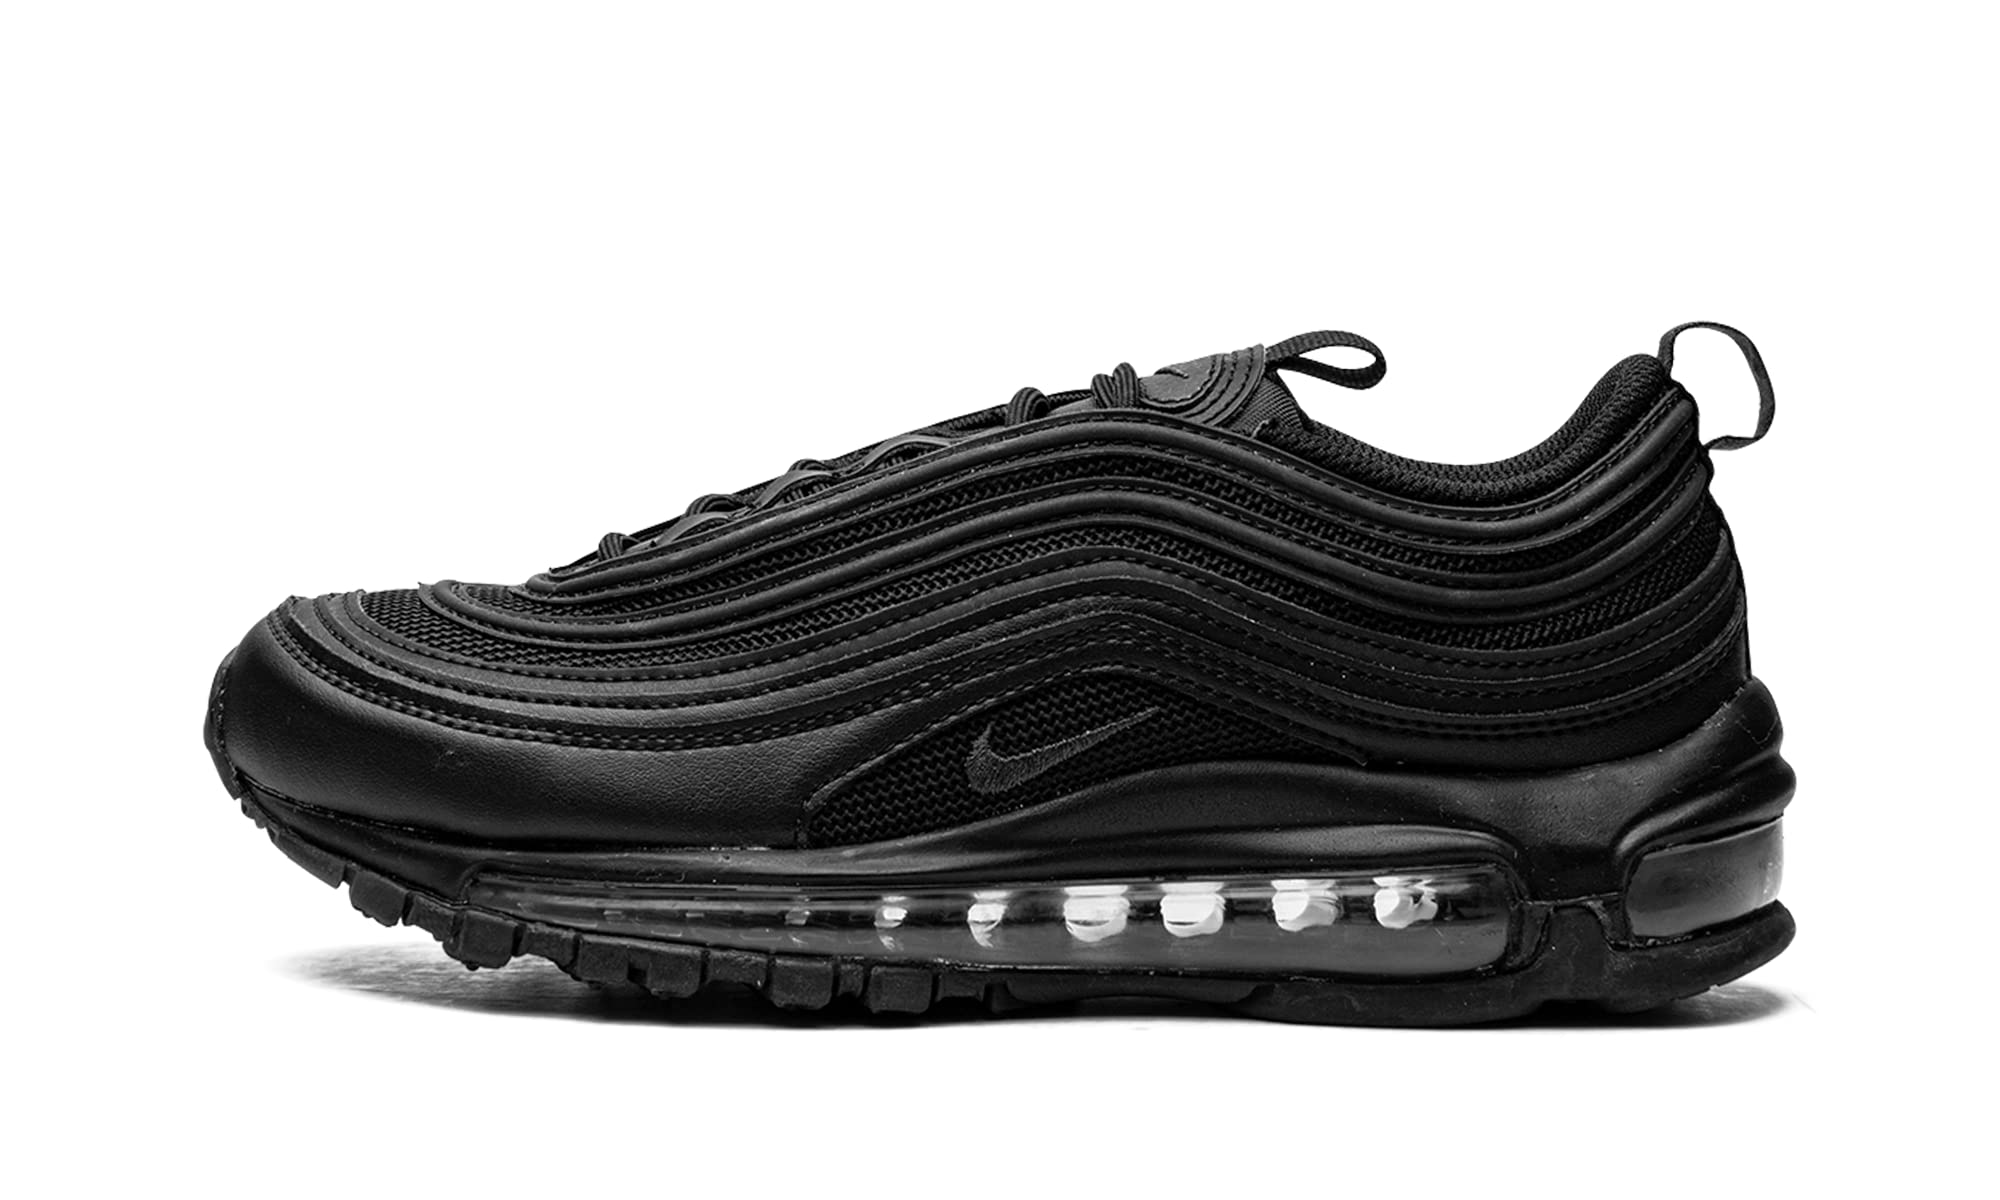 Nike Women's Air Max 97 Running Shoes - Sneakermaniany